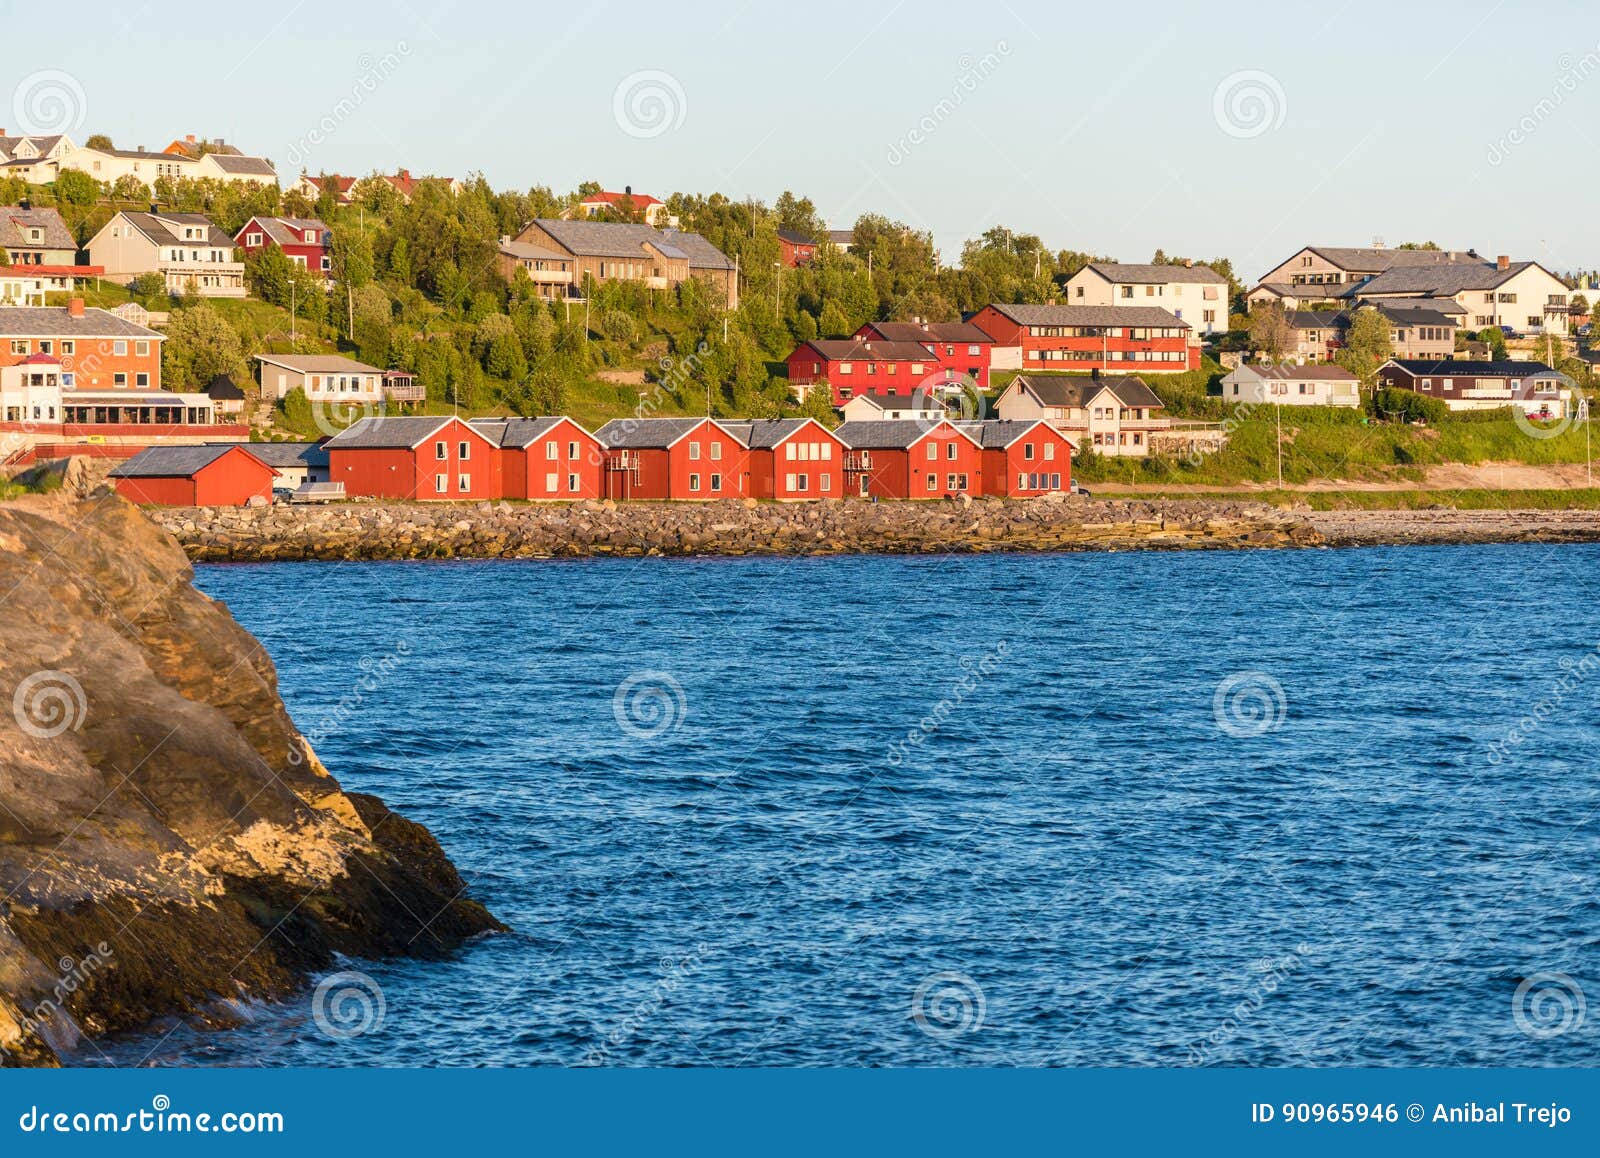 red houses on the bay of alta, norway